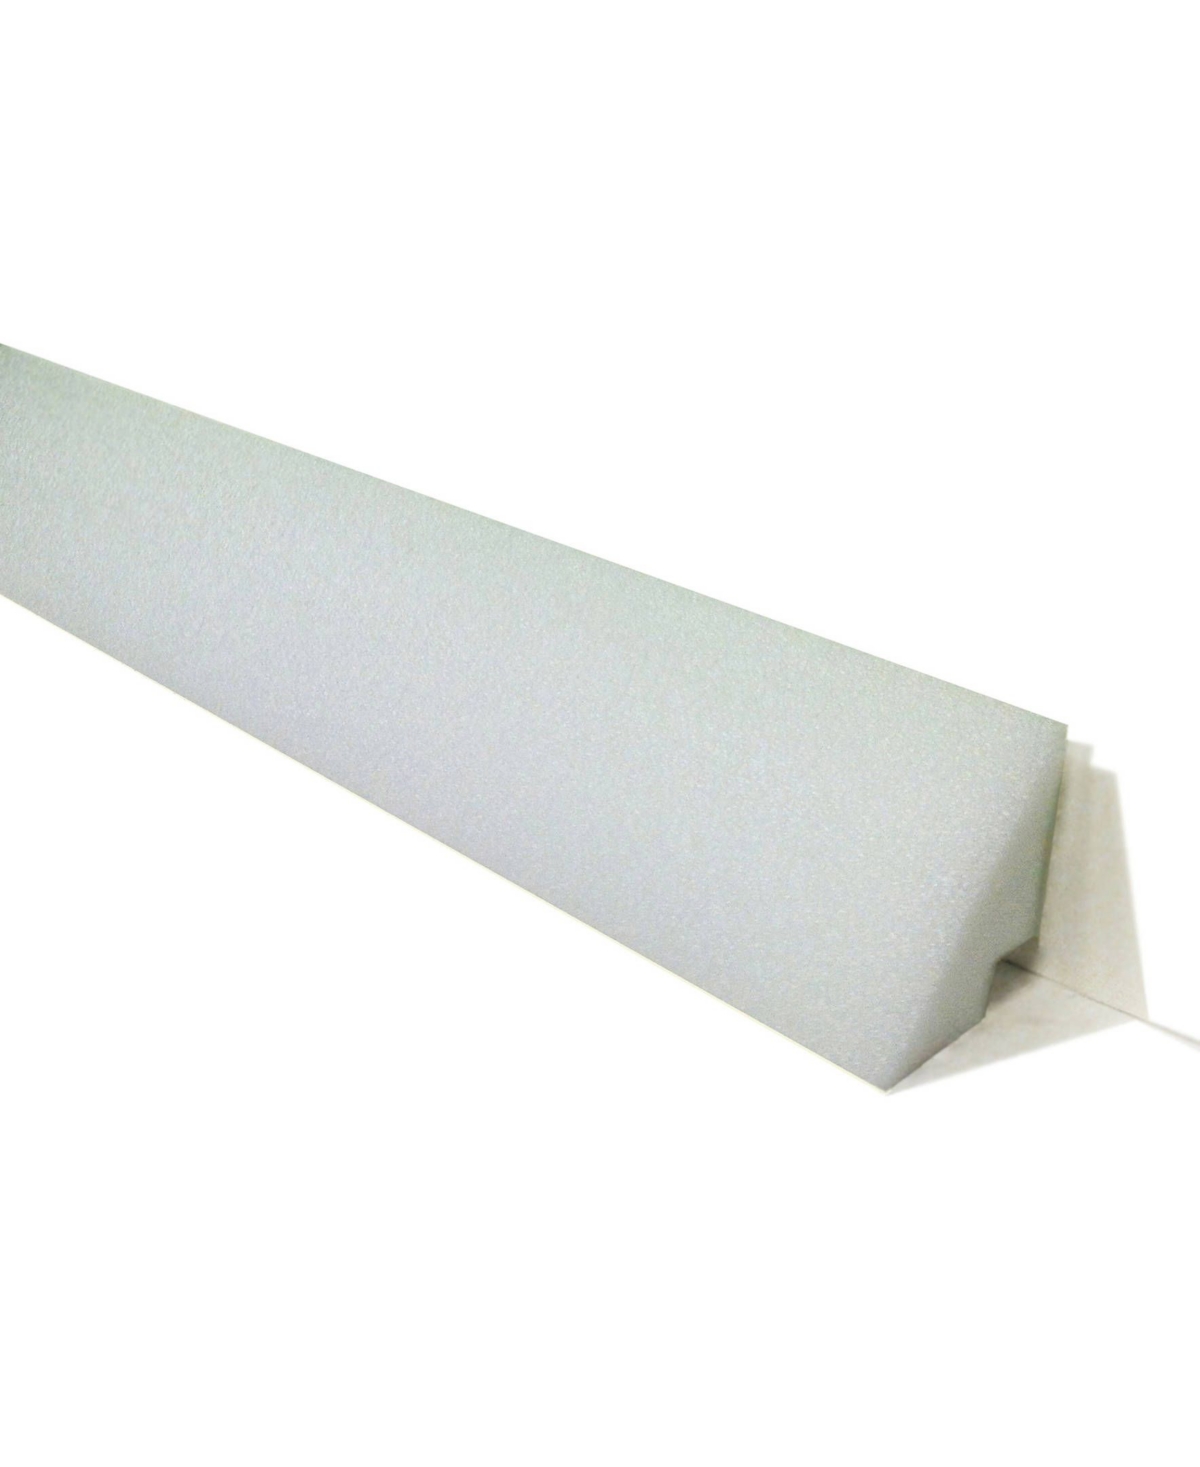 Sports 48" Peel and Stick Above Ground Pool Cover - 10 Pack - White